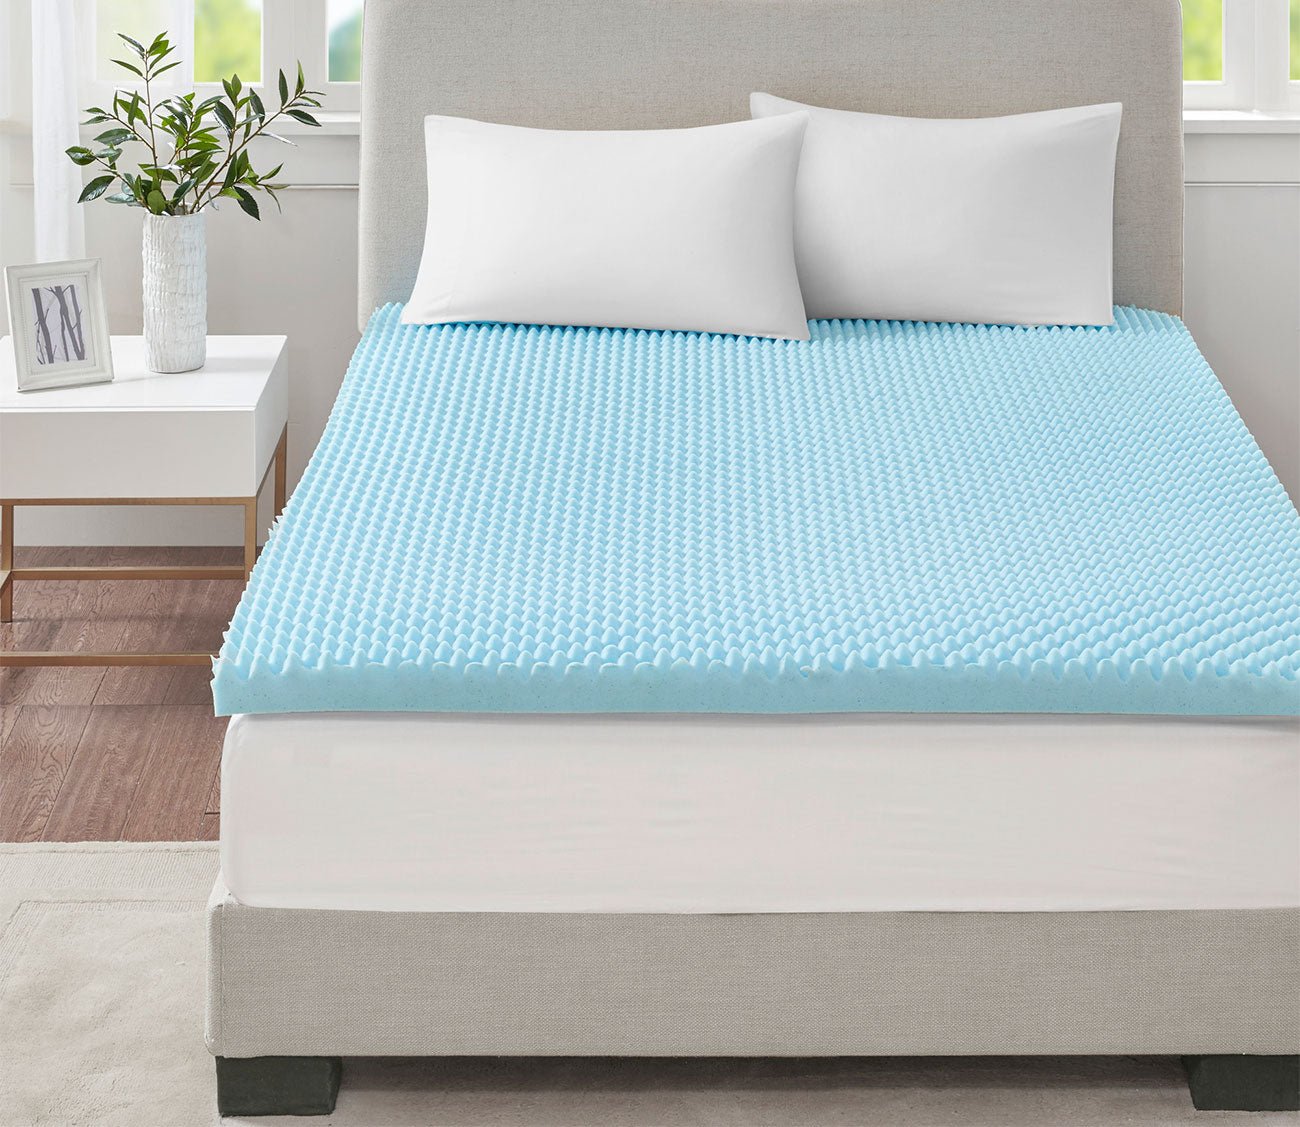 Mattress Topper Full size, 2 inch Cooling Gel Memory Foam Bed Topper for Pressure Relief, Blue